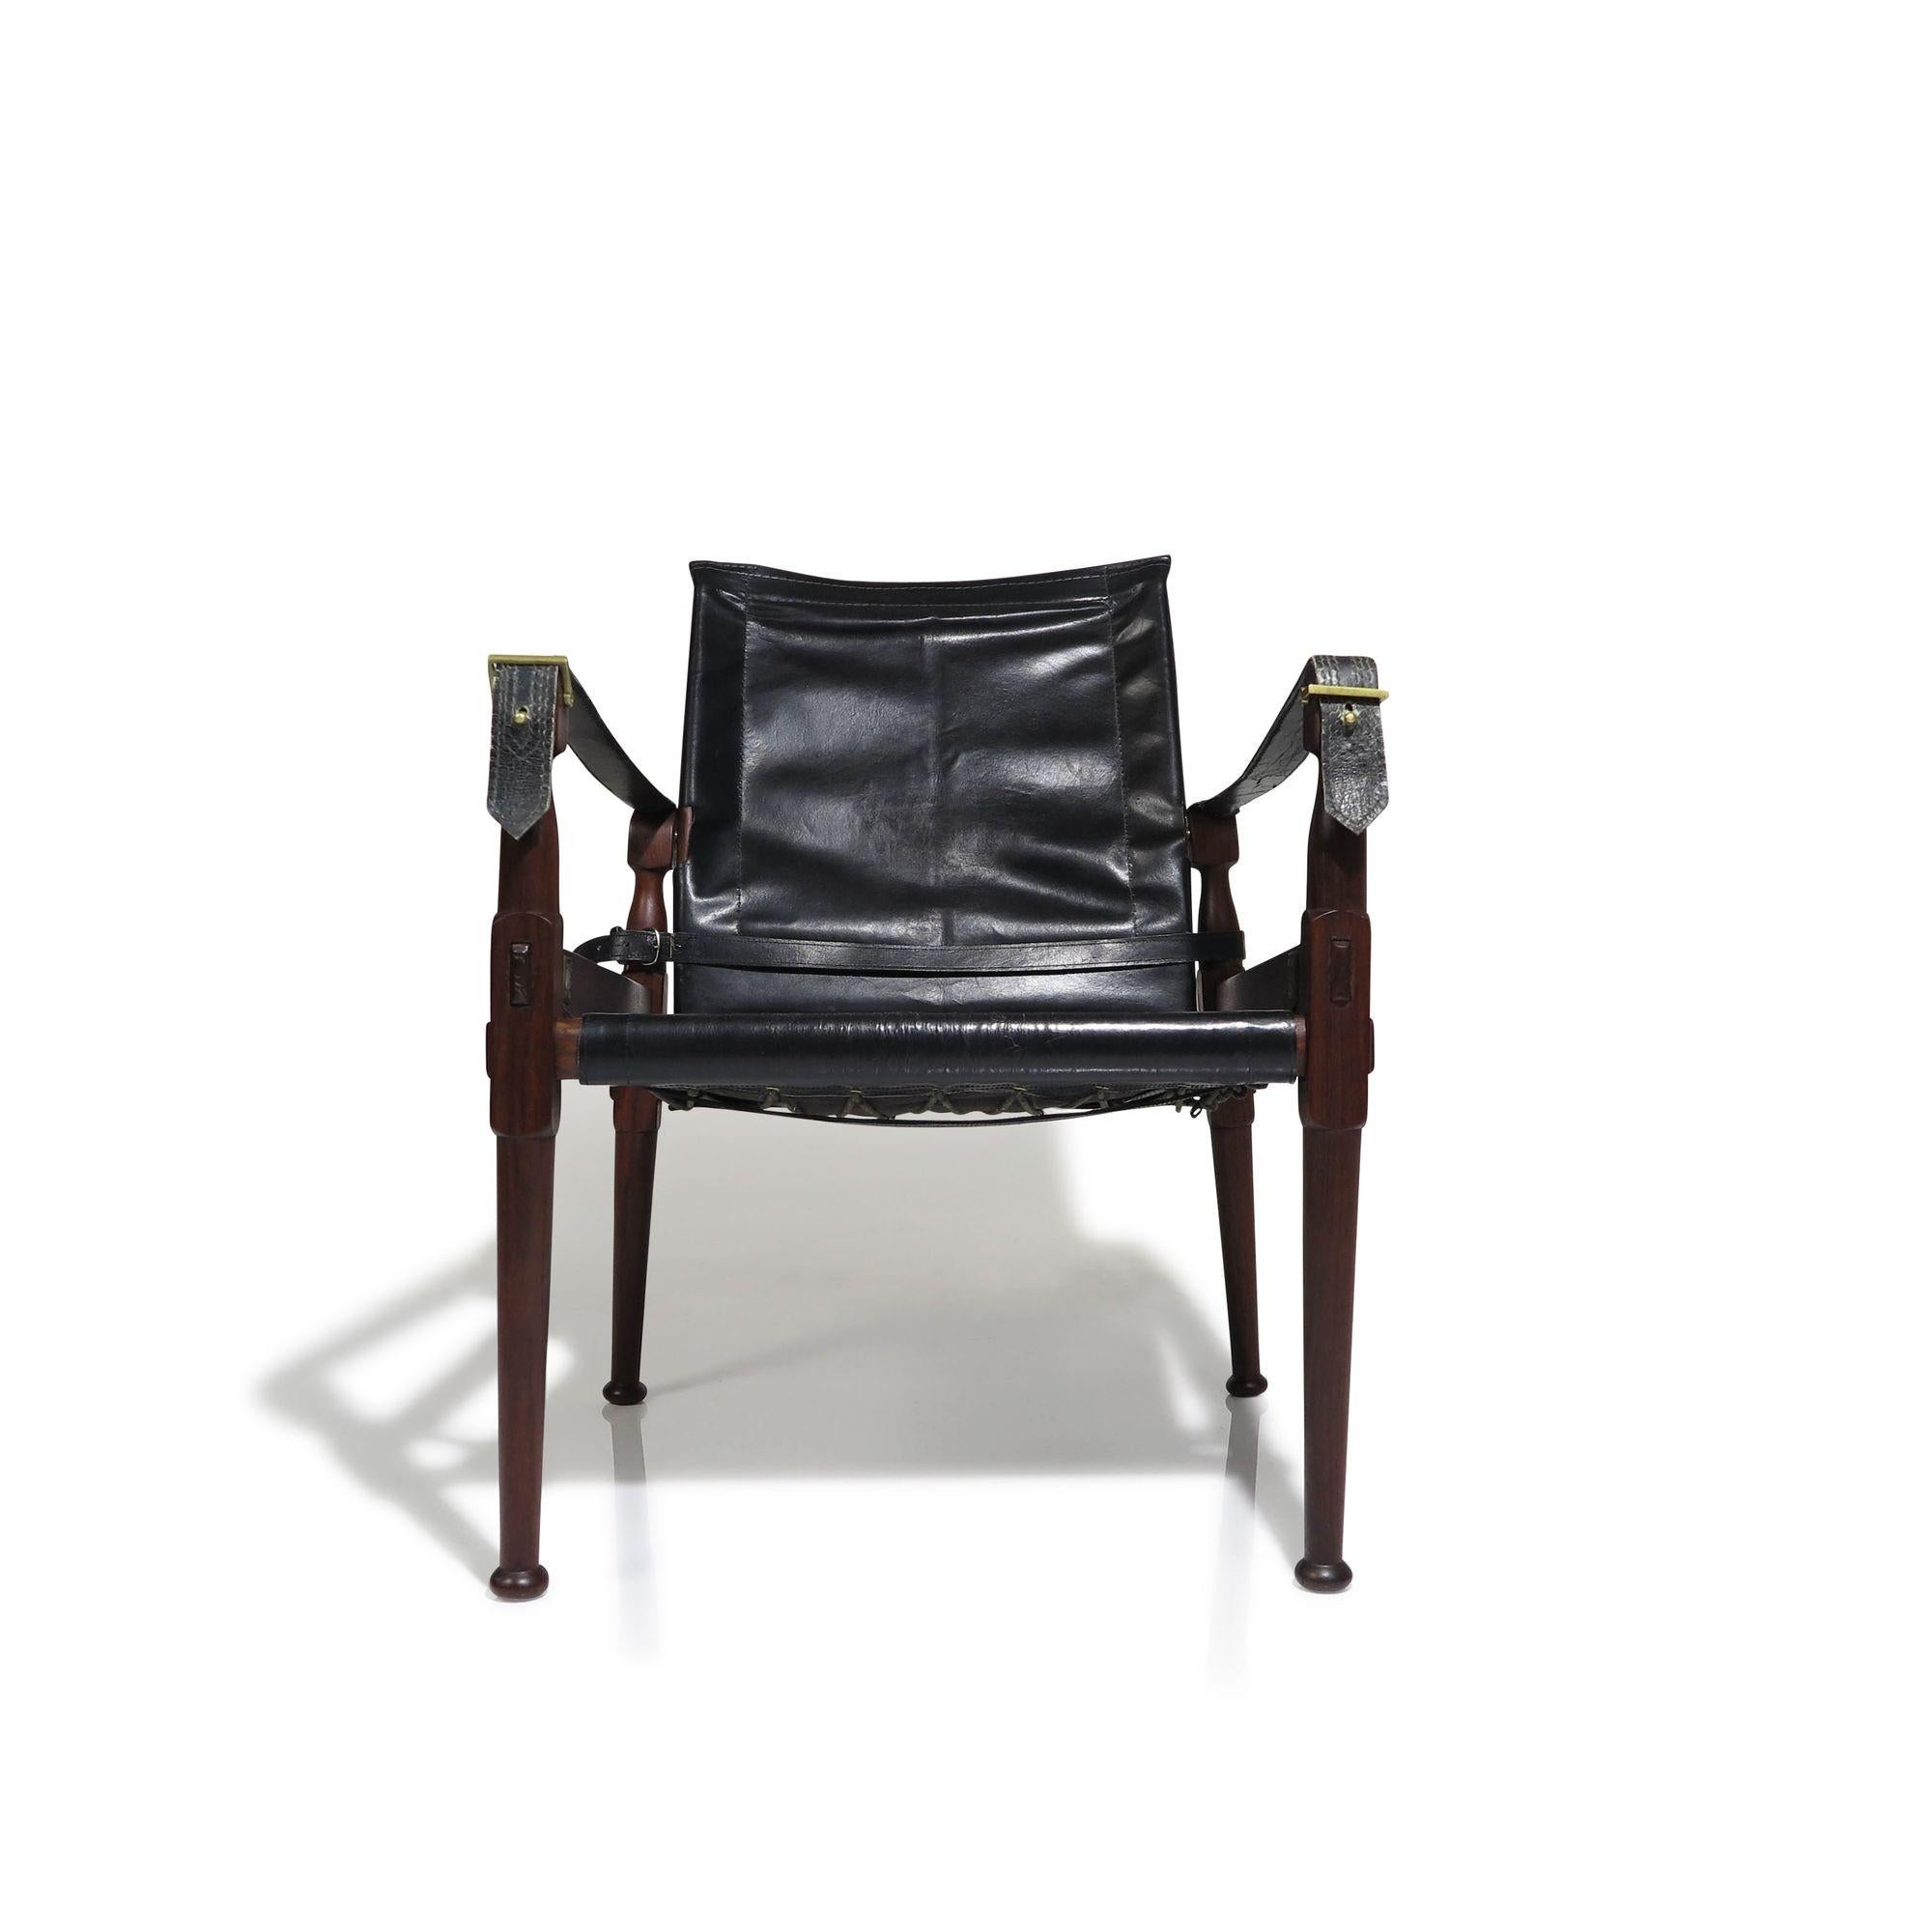 Pakistani Rosewood Safari Chairs with Brass by Hayat Brothers 3